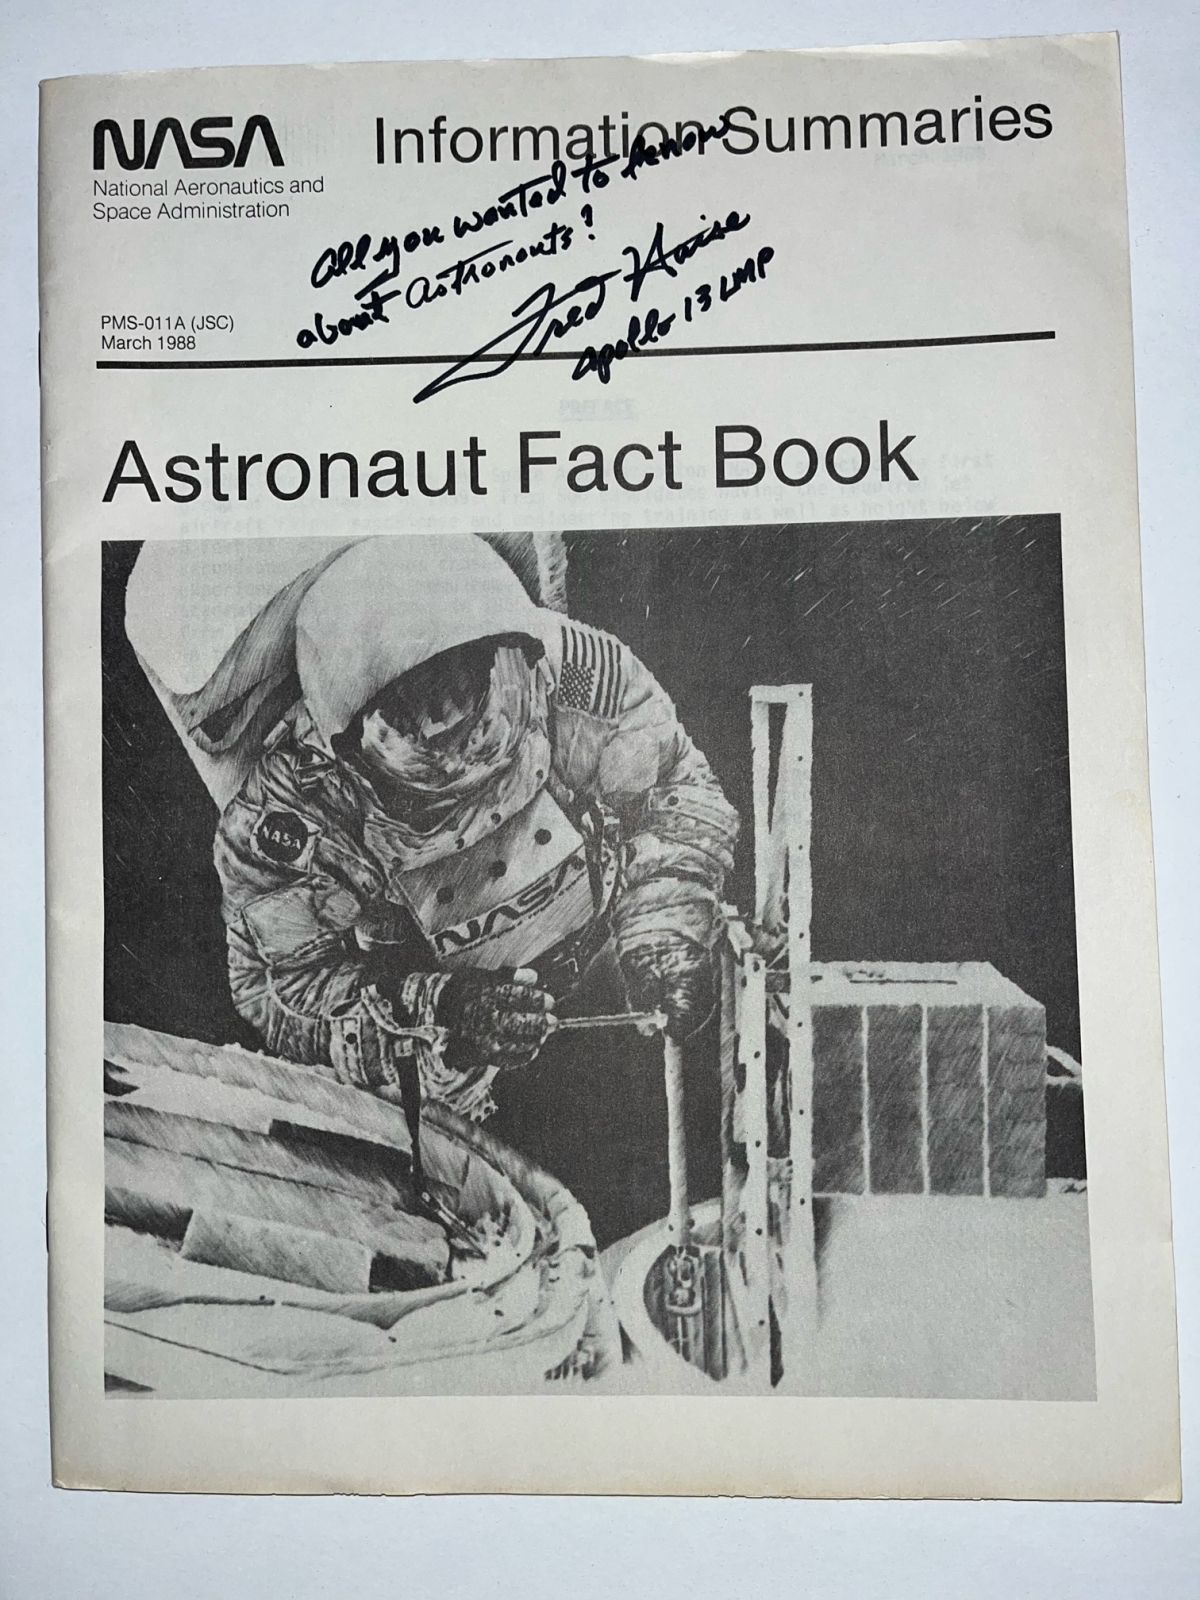 NASA Astronaut Informative Summaries Astronaut Fact Book signed by Fred Haise - The Space Store